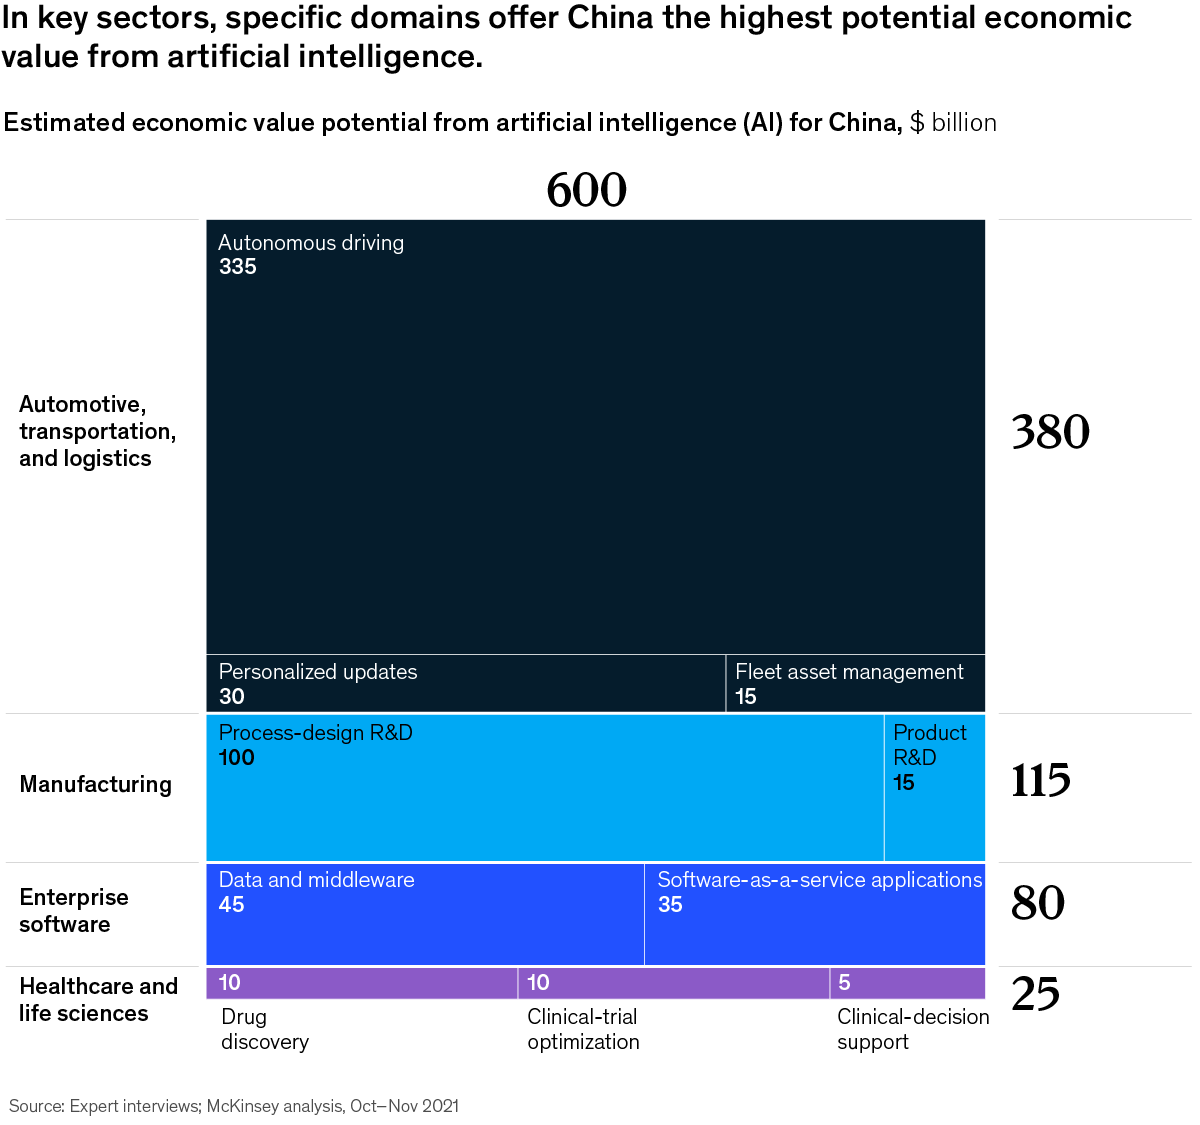 Chart detailing China's key sectors that offer the highest potential for economic value from AI